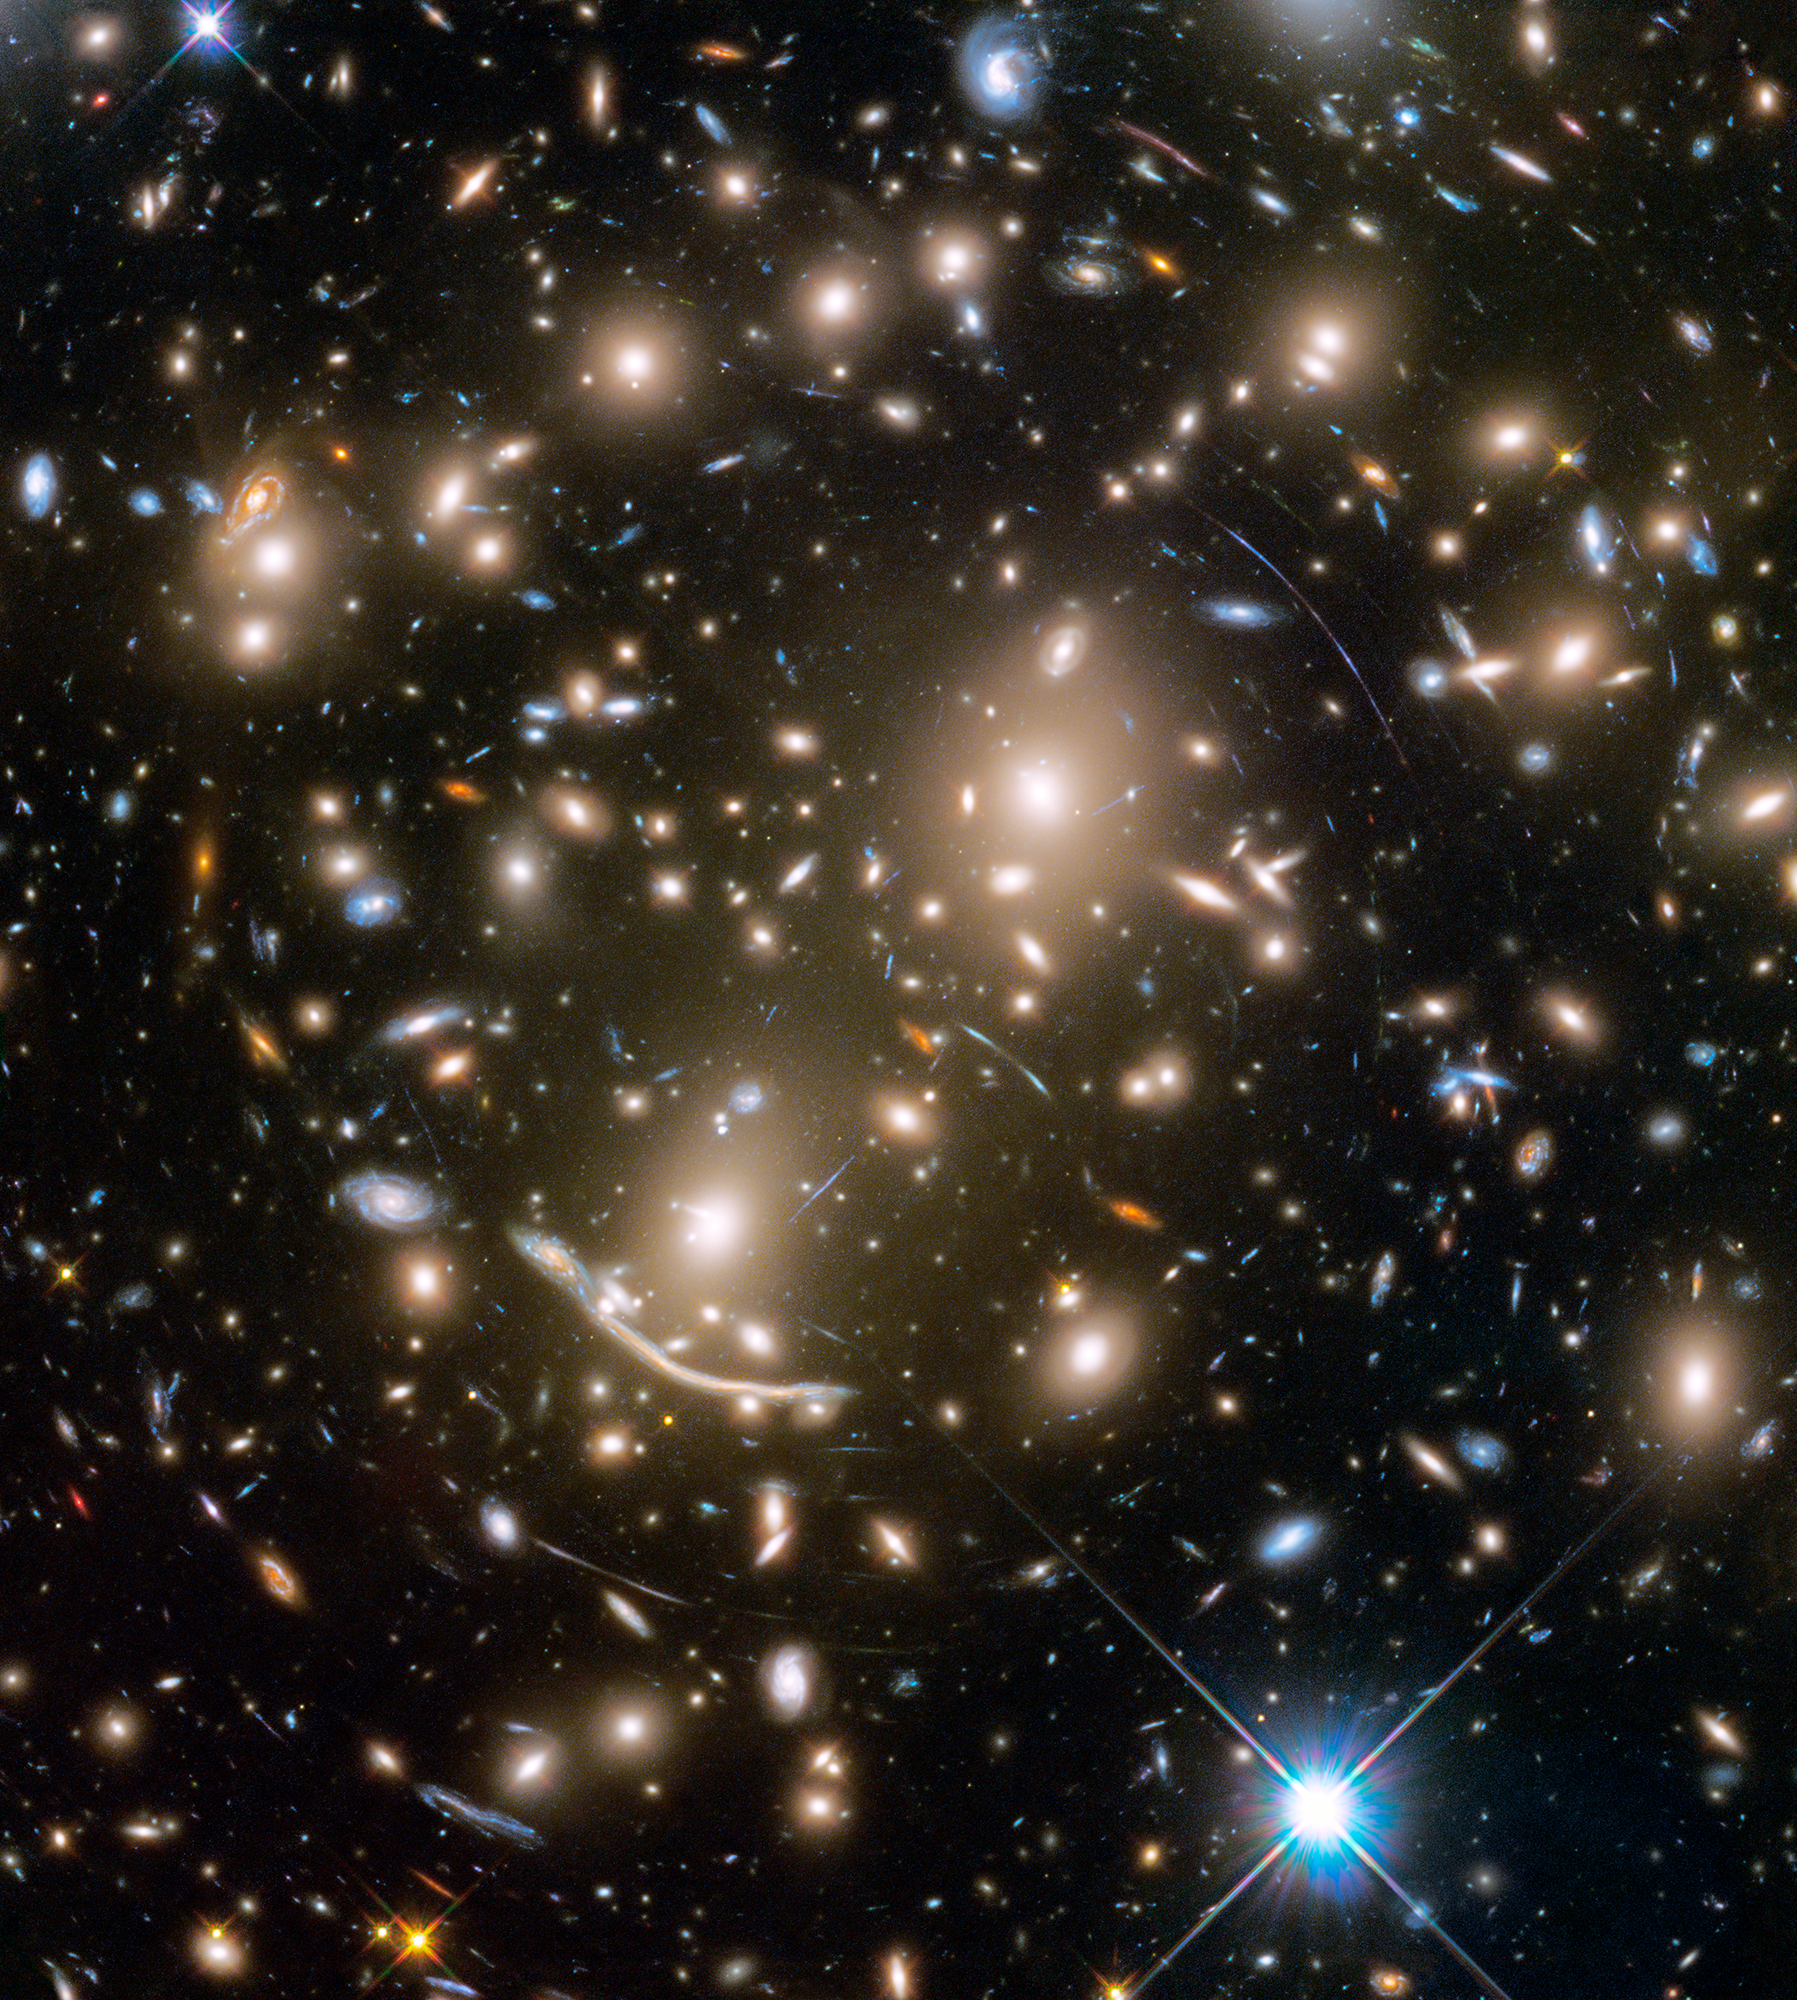 This Hubble Space Telescope mosaic shows a portion of the immense Coma galaxy cluster.